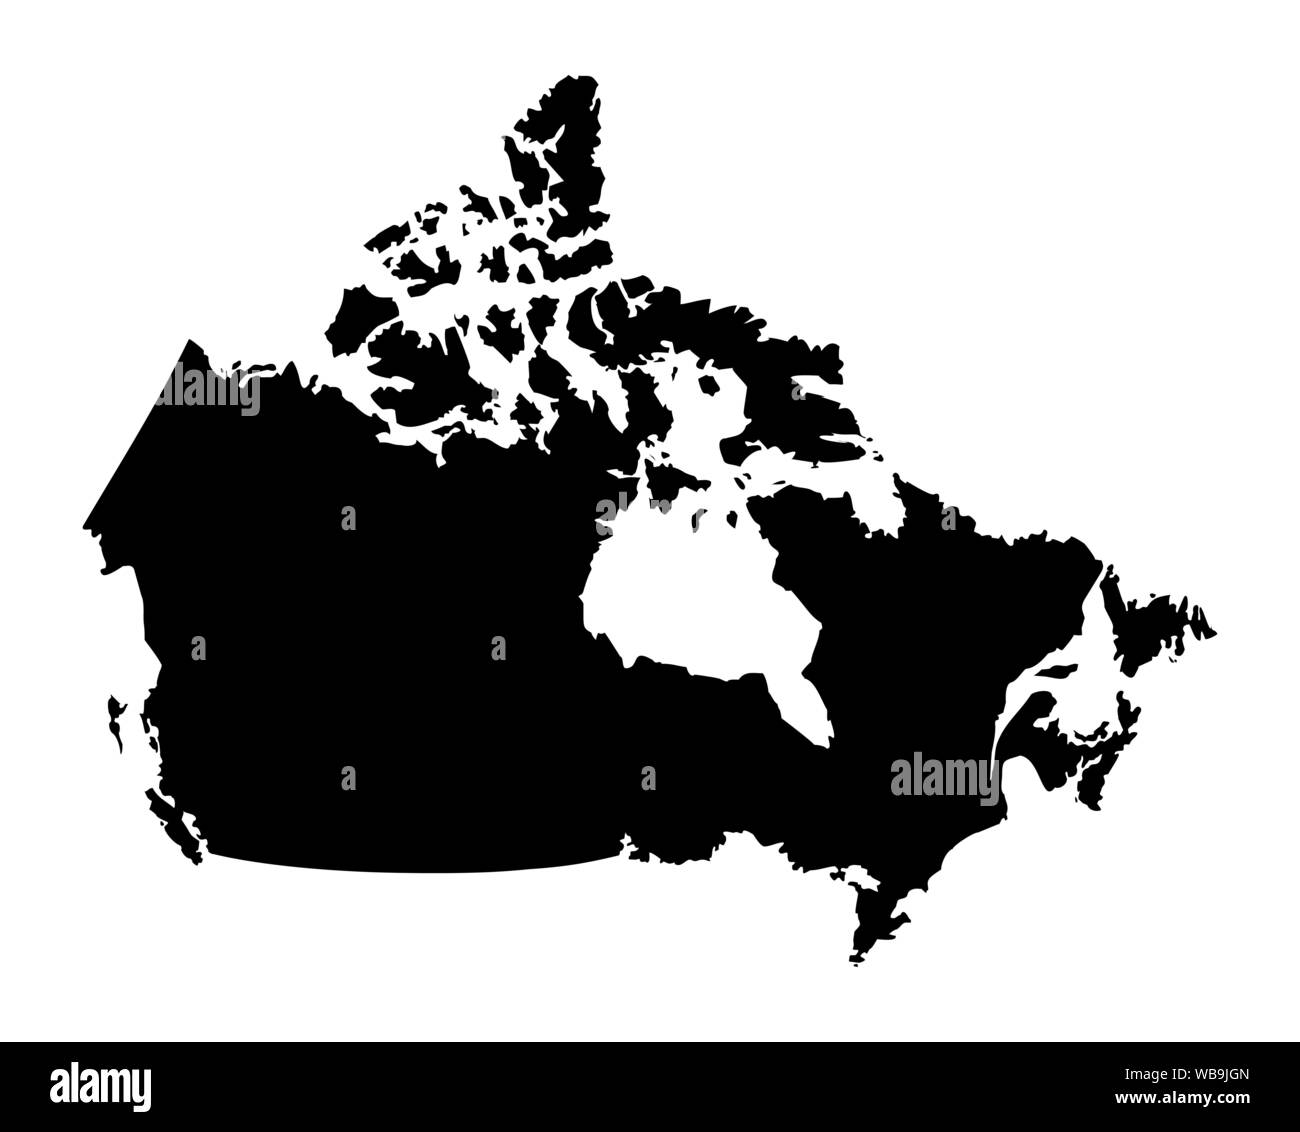 Canada dark silhouette map isolated on white background Stock Vector